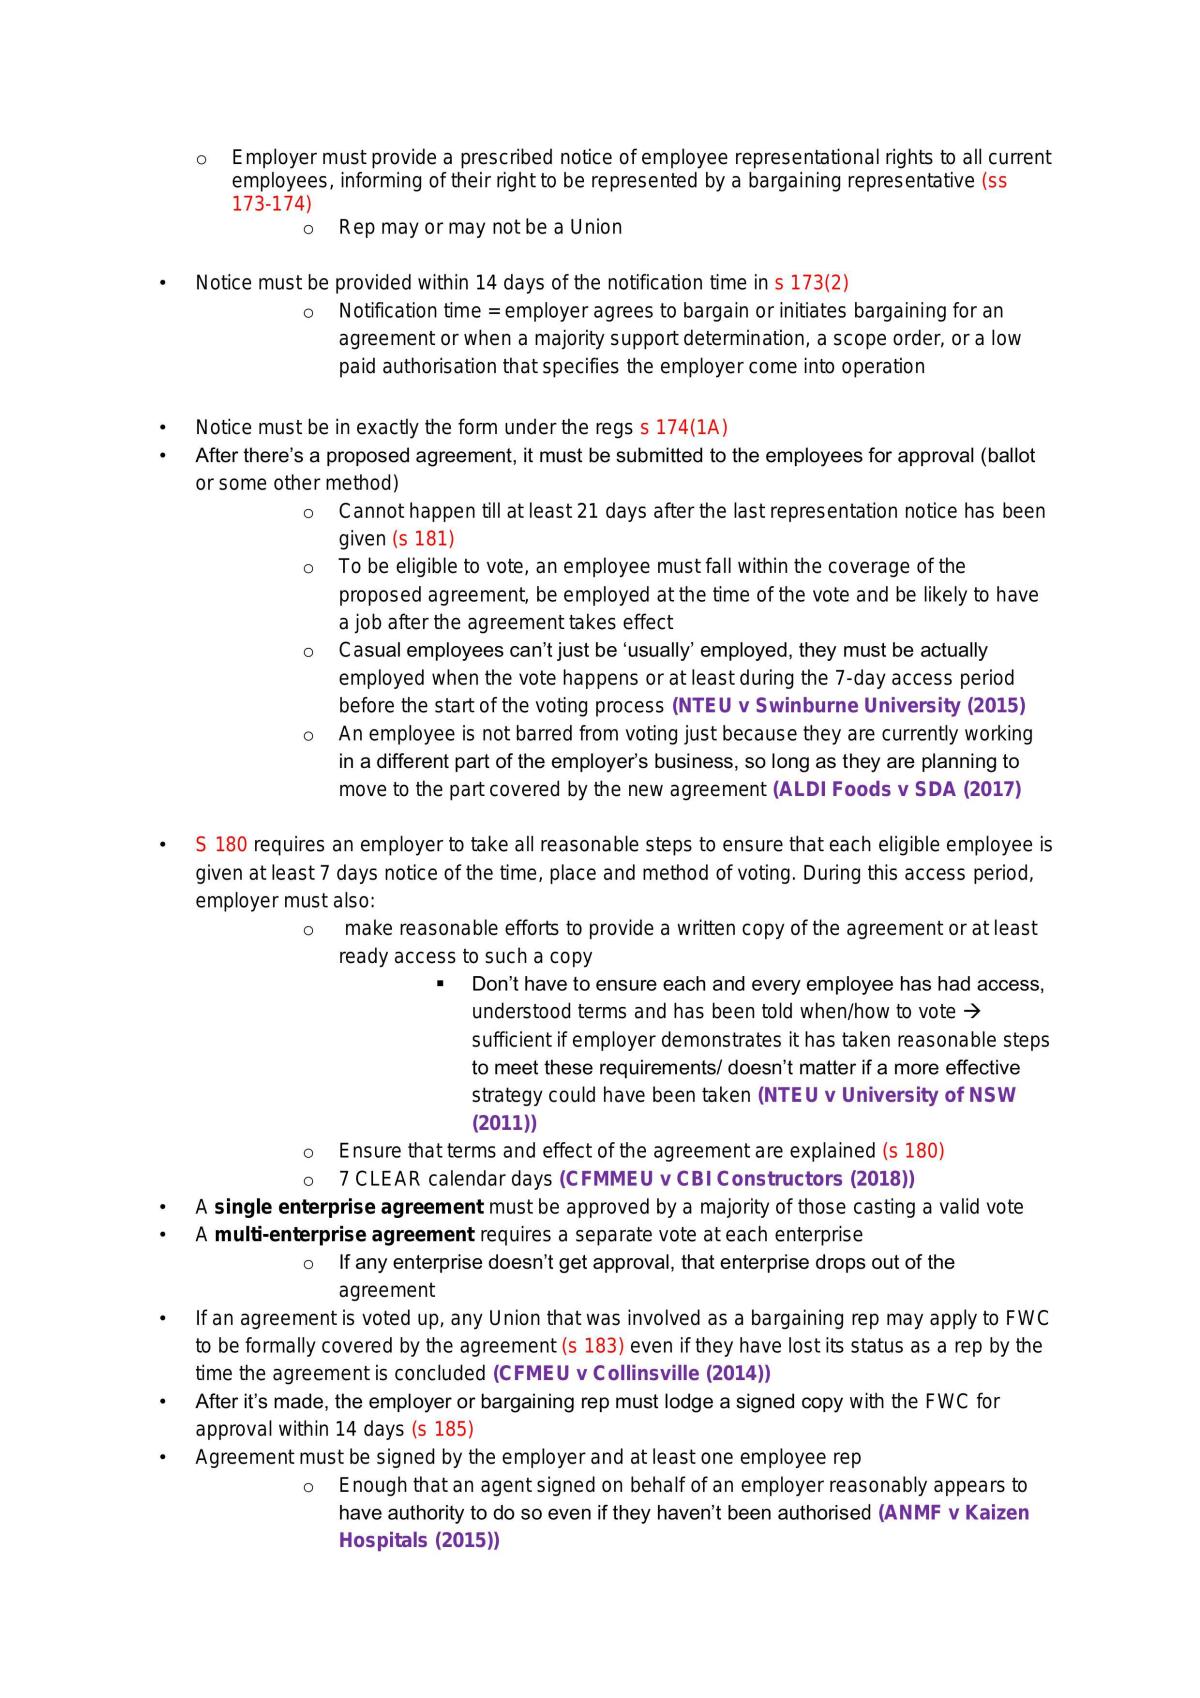 Exhaustive Study Guide - Labour Law - LAWS5122 - Page 26